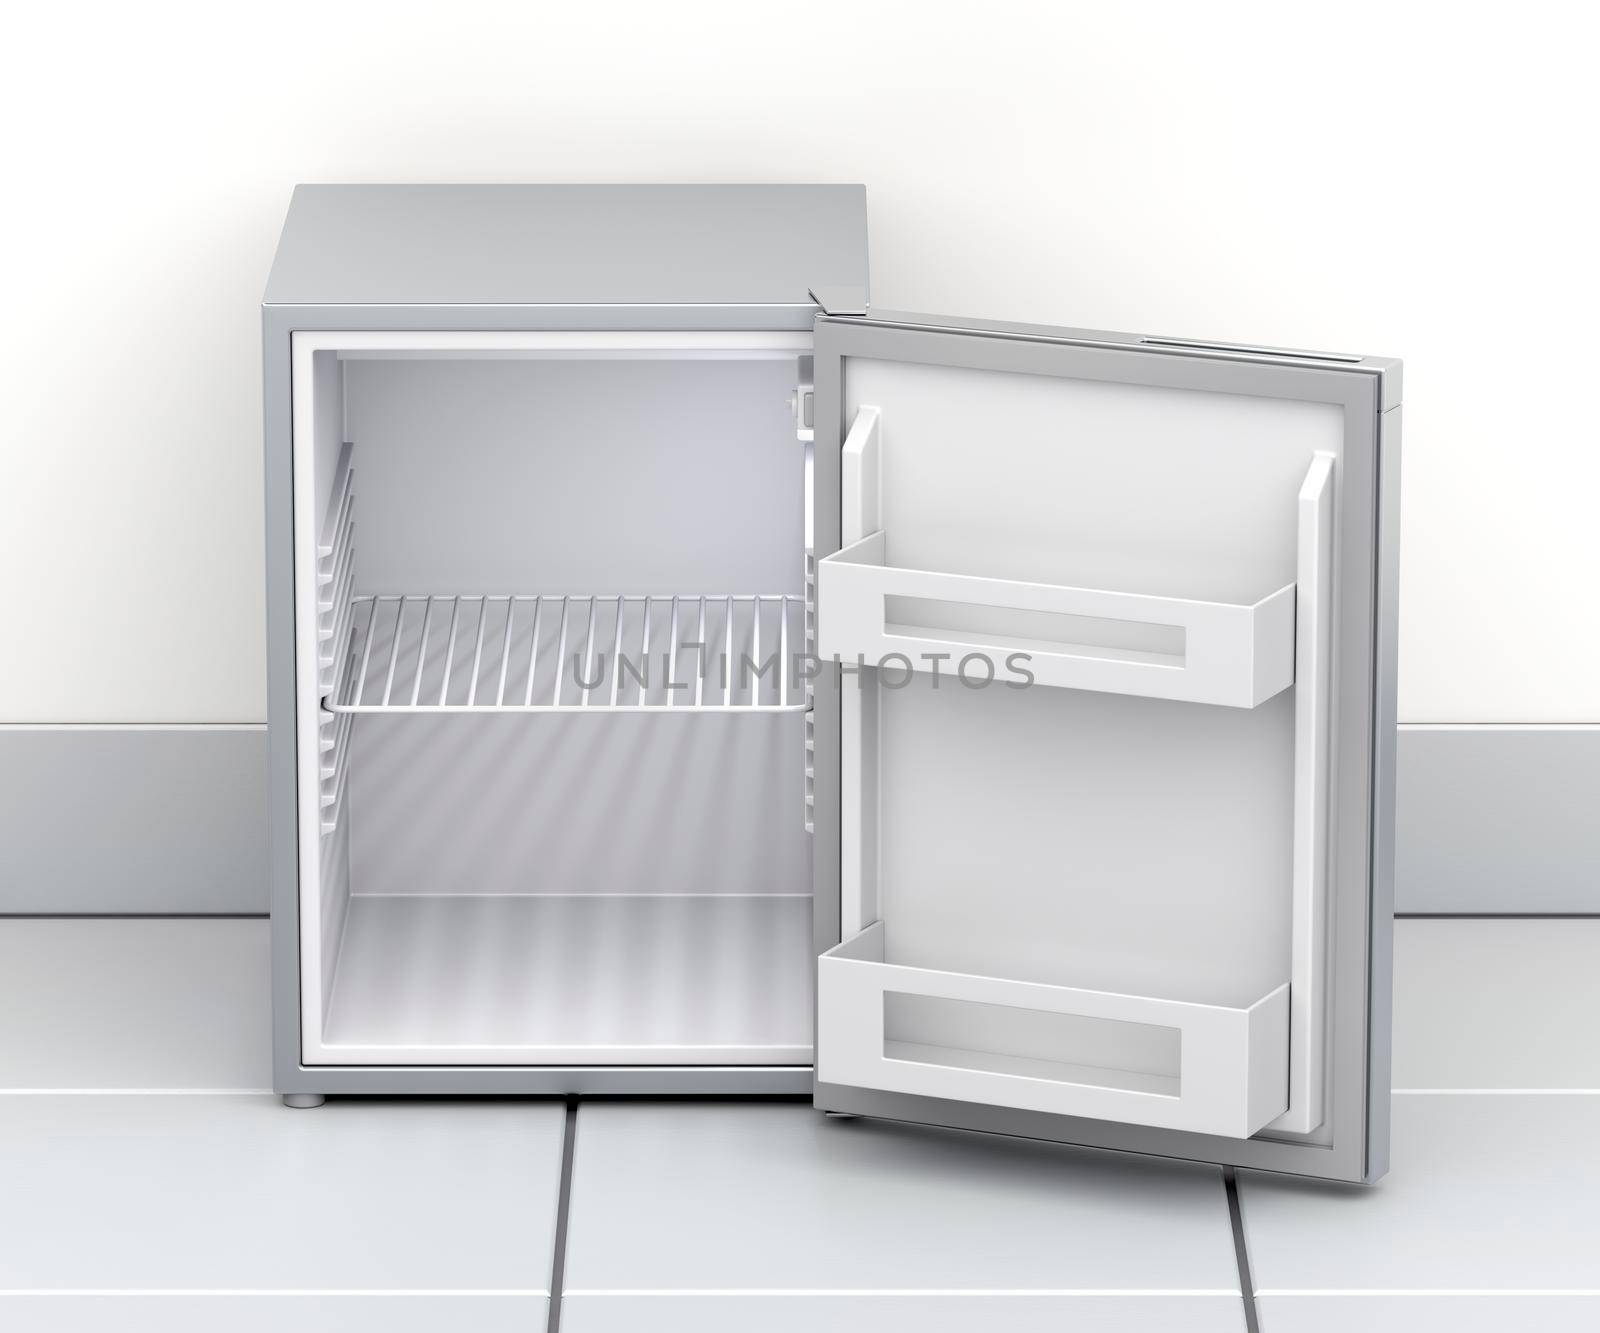 Empty small refrigerator by magraphics